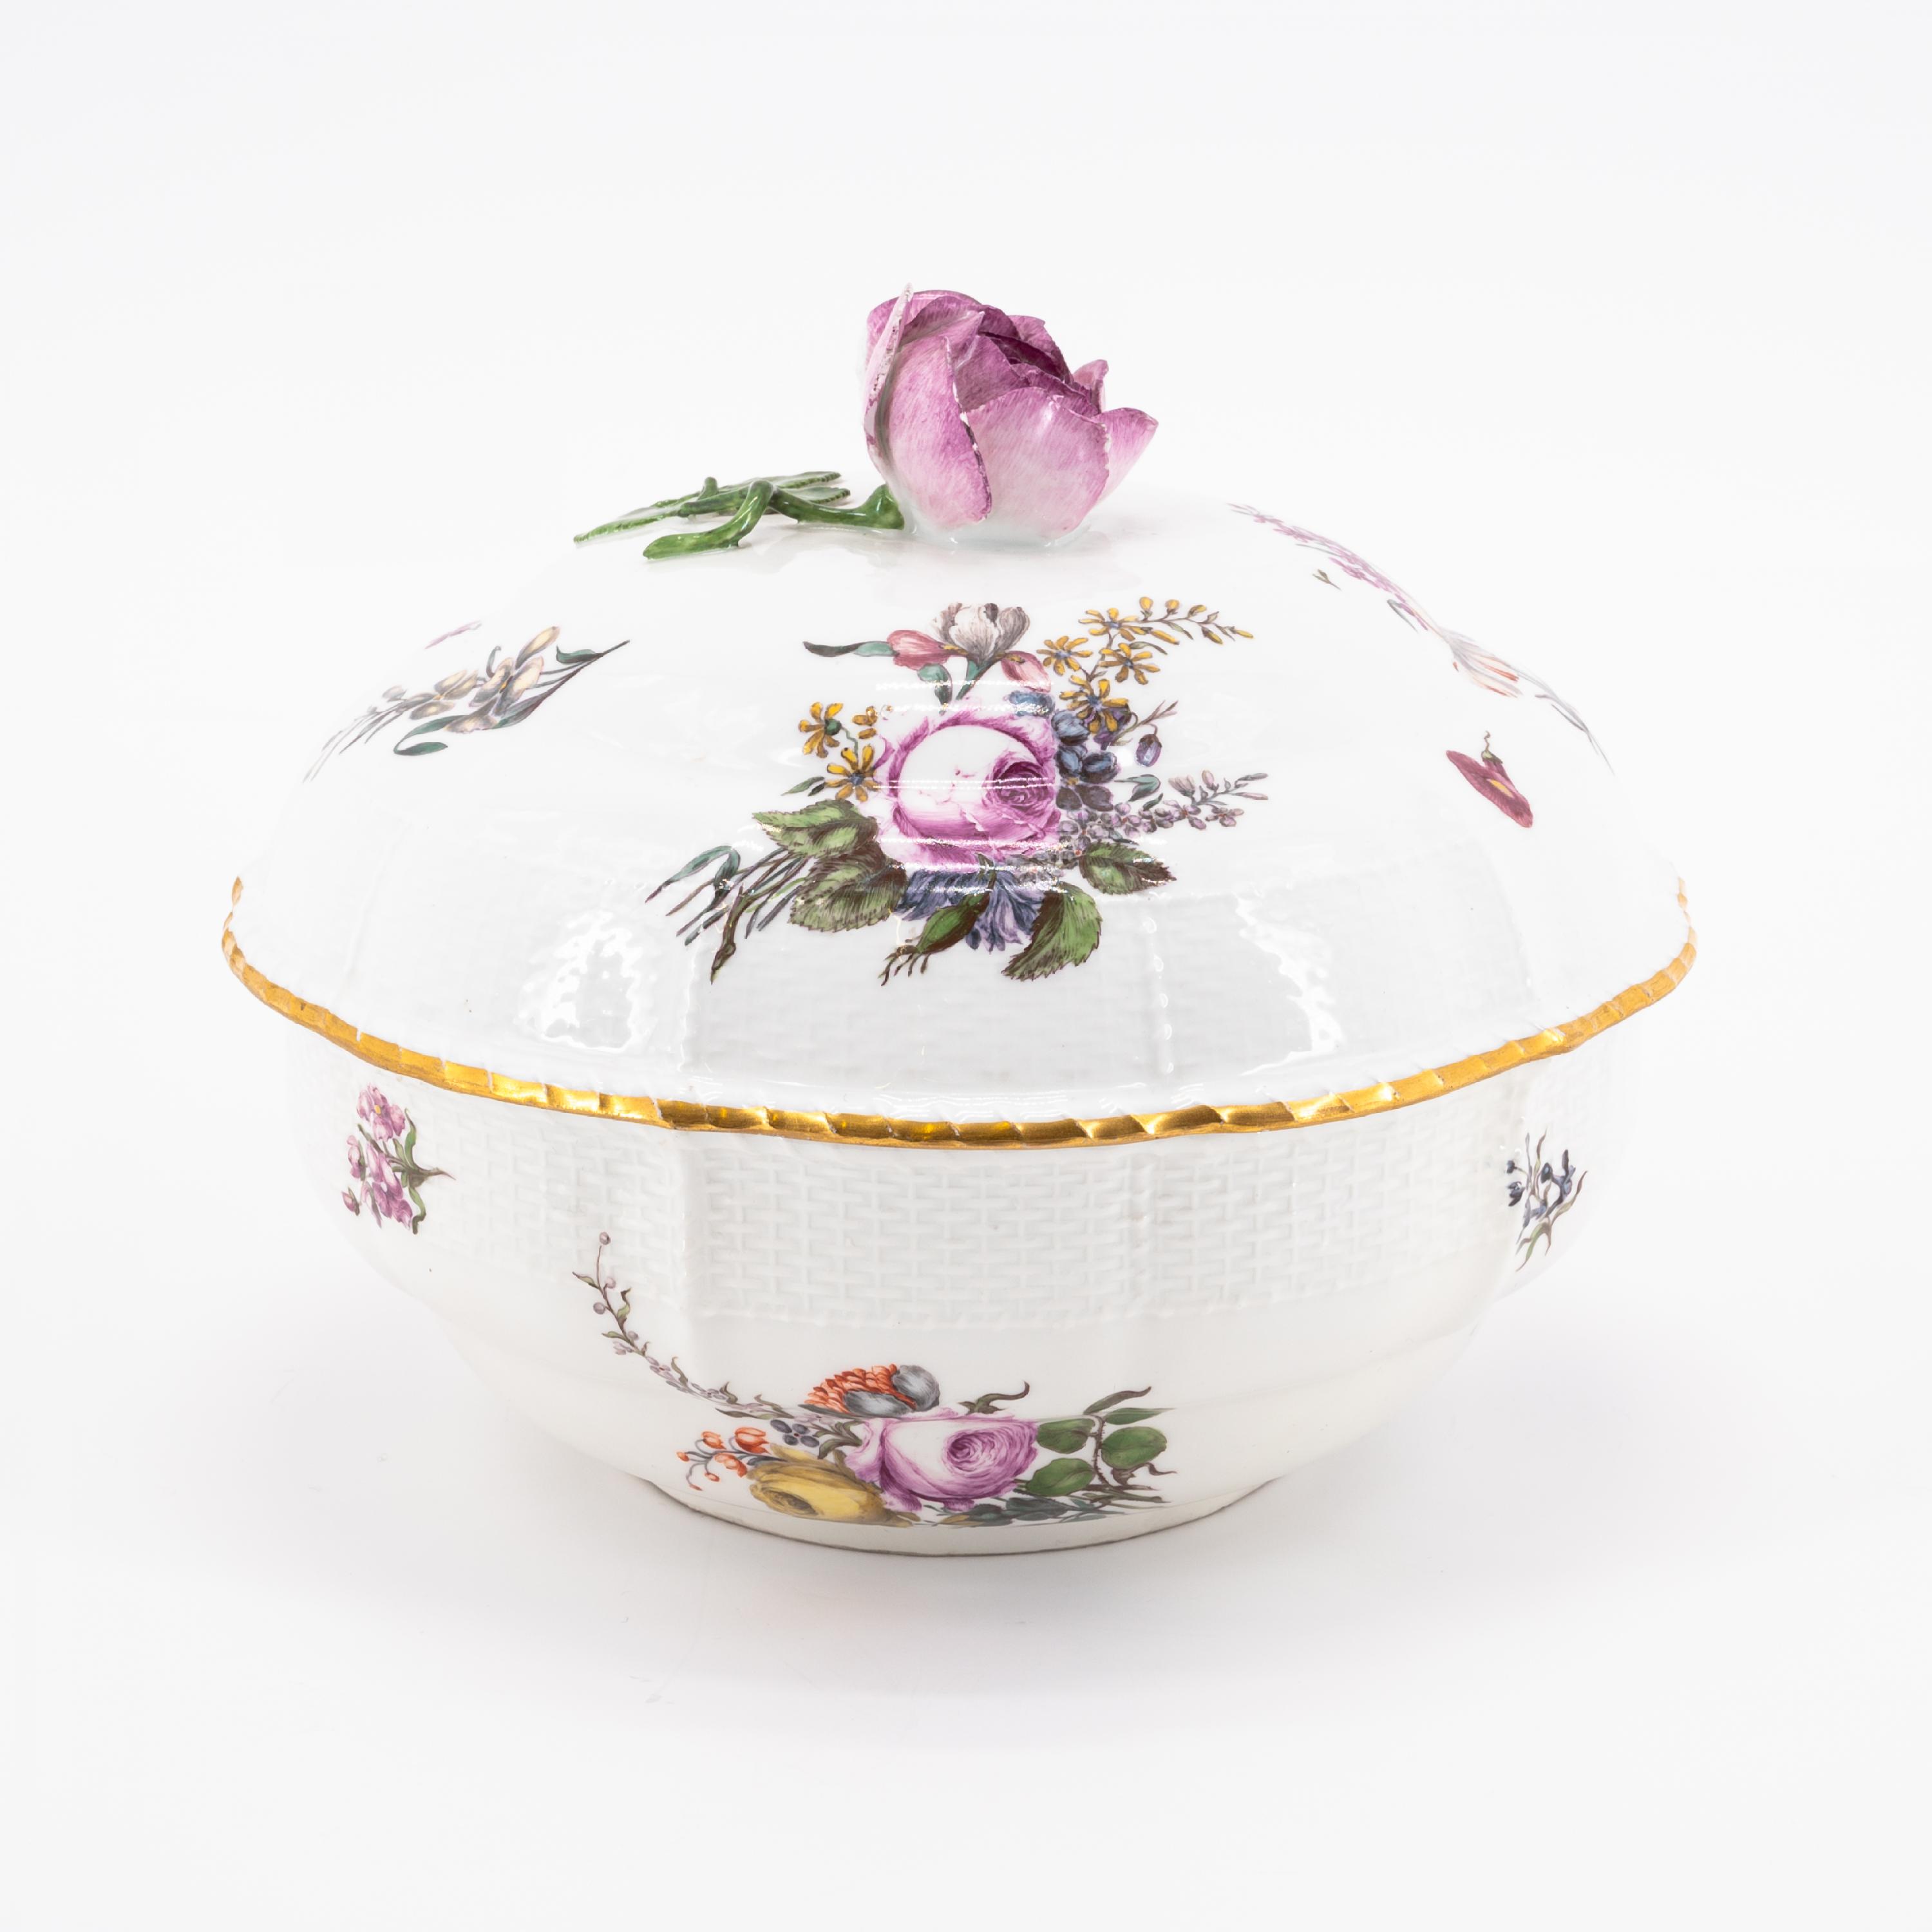 LARGE PORCELAIN LIDDED BOWL WITH FLOWER KNOB, SMALL TEA POT WITH WOODCUT FLOWERS AND CUP WITH SAUCER - Image 3 of 18